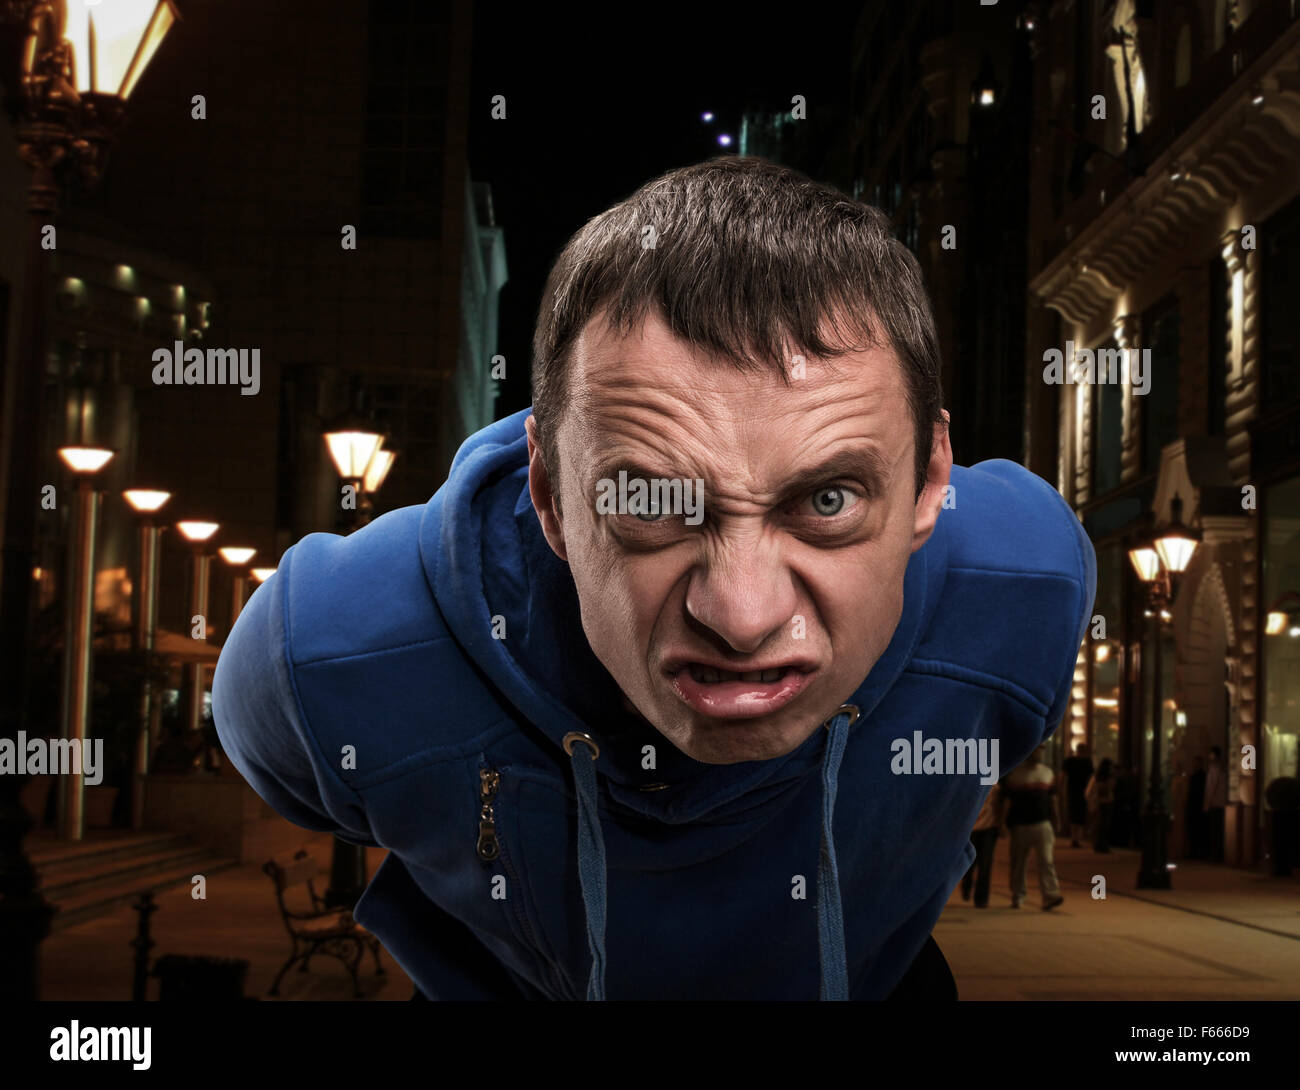 Agressive man's face in the city Stock Photo